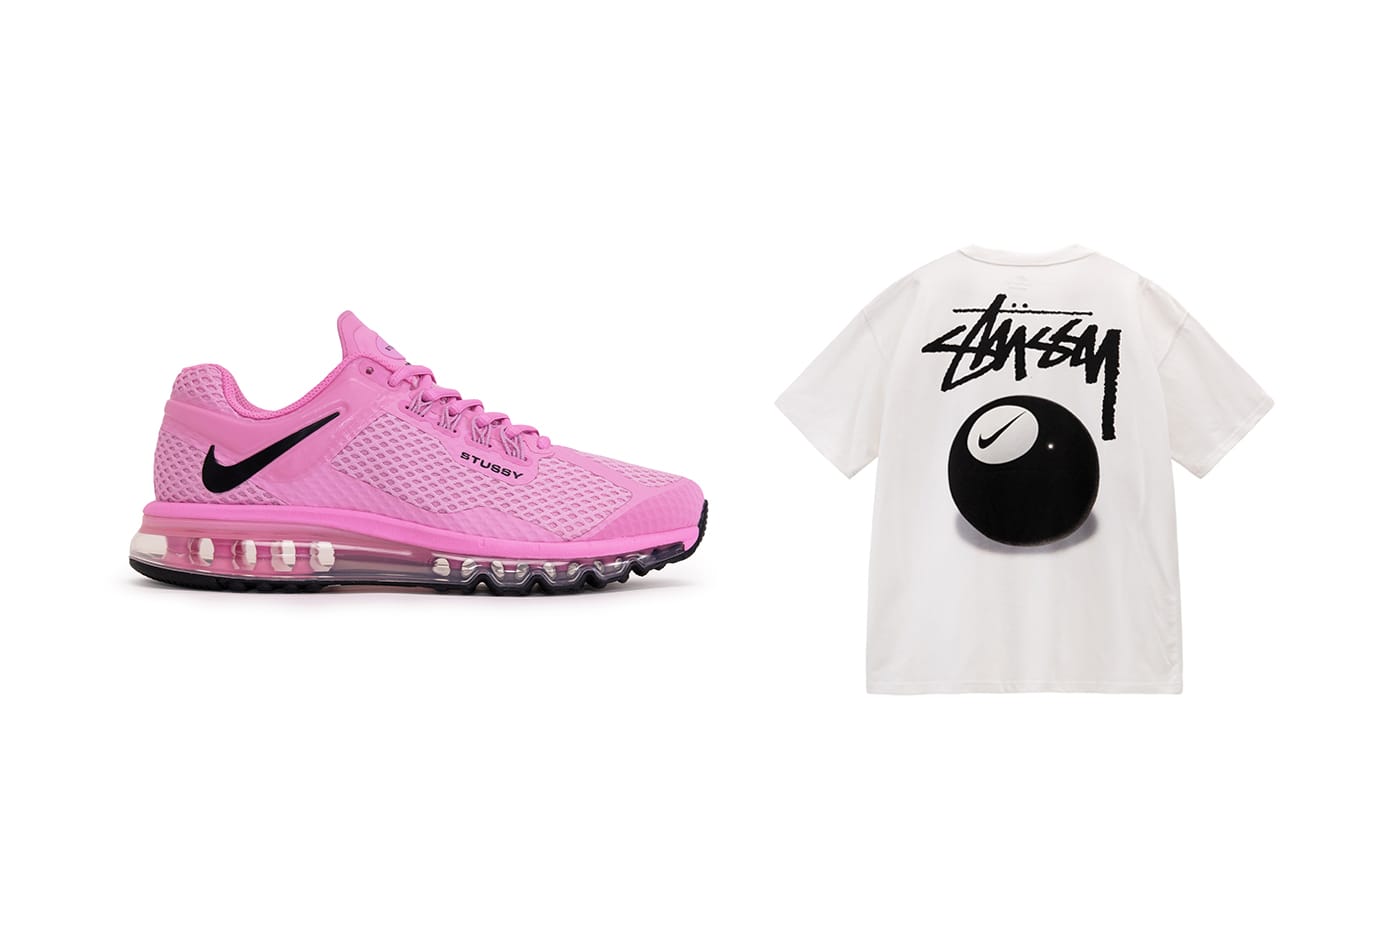 Stüssy x Nike Air Max 2013 Full Collection | HYPEBEAST